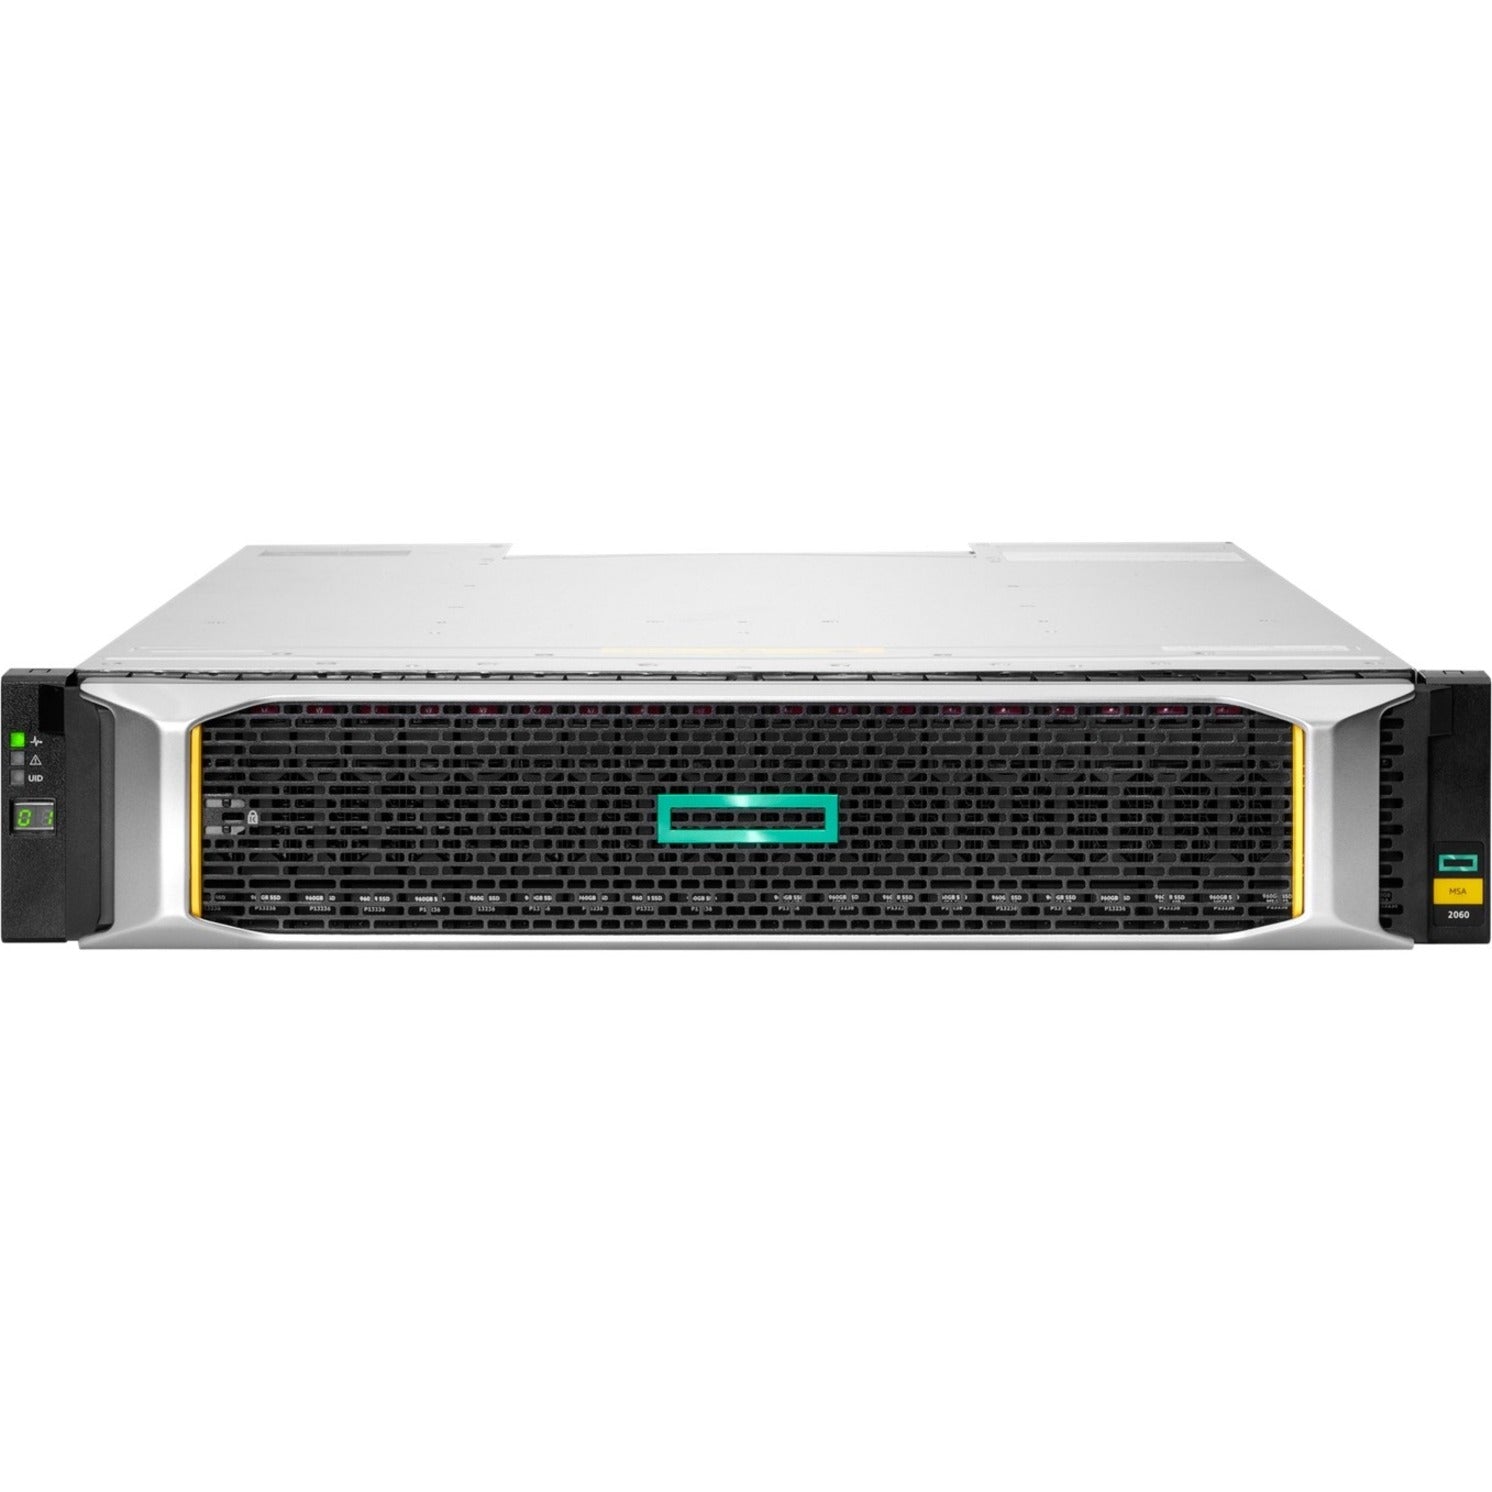 HPE R7J73B MSA 2060 10GBASE-T iSCSI SFF Storage, Clustering Supported, 24 Drive Support